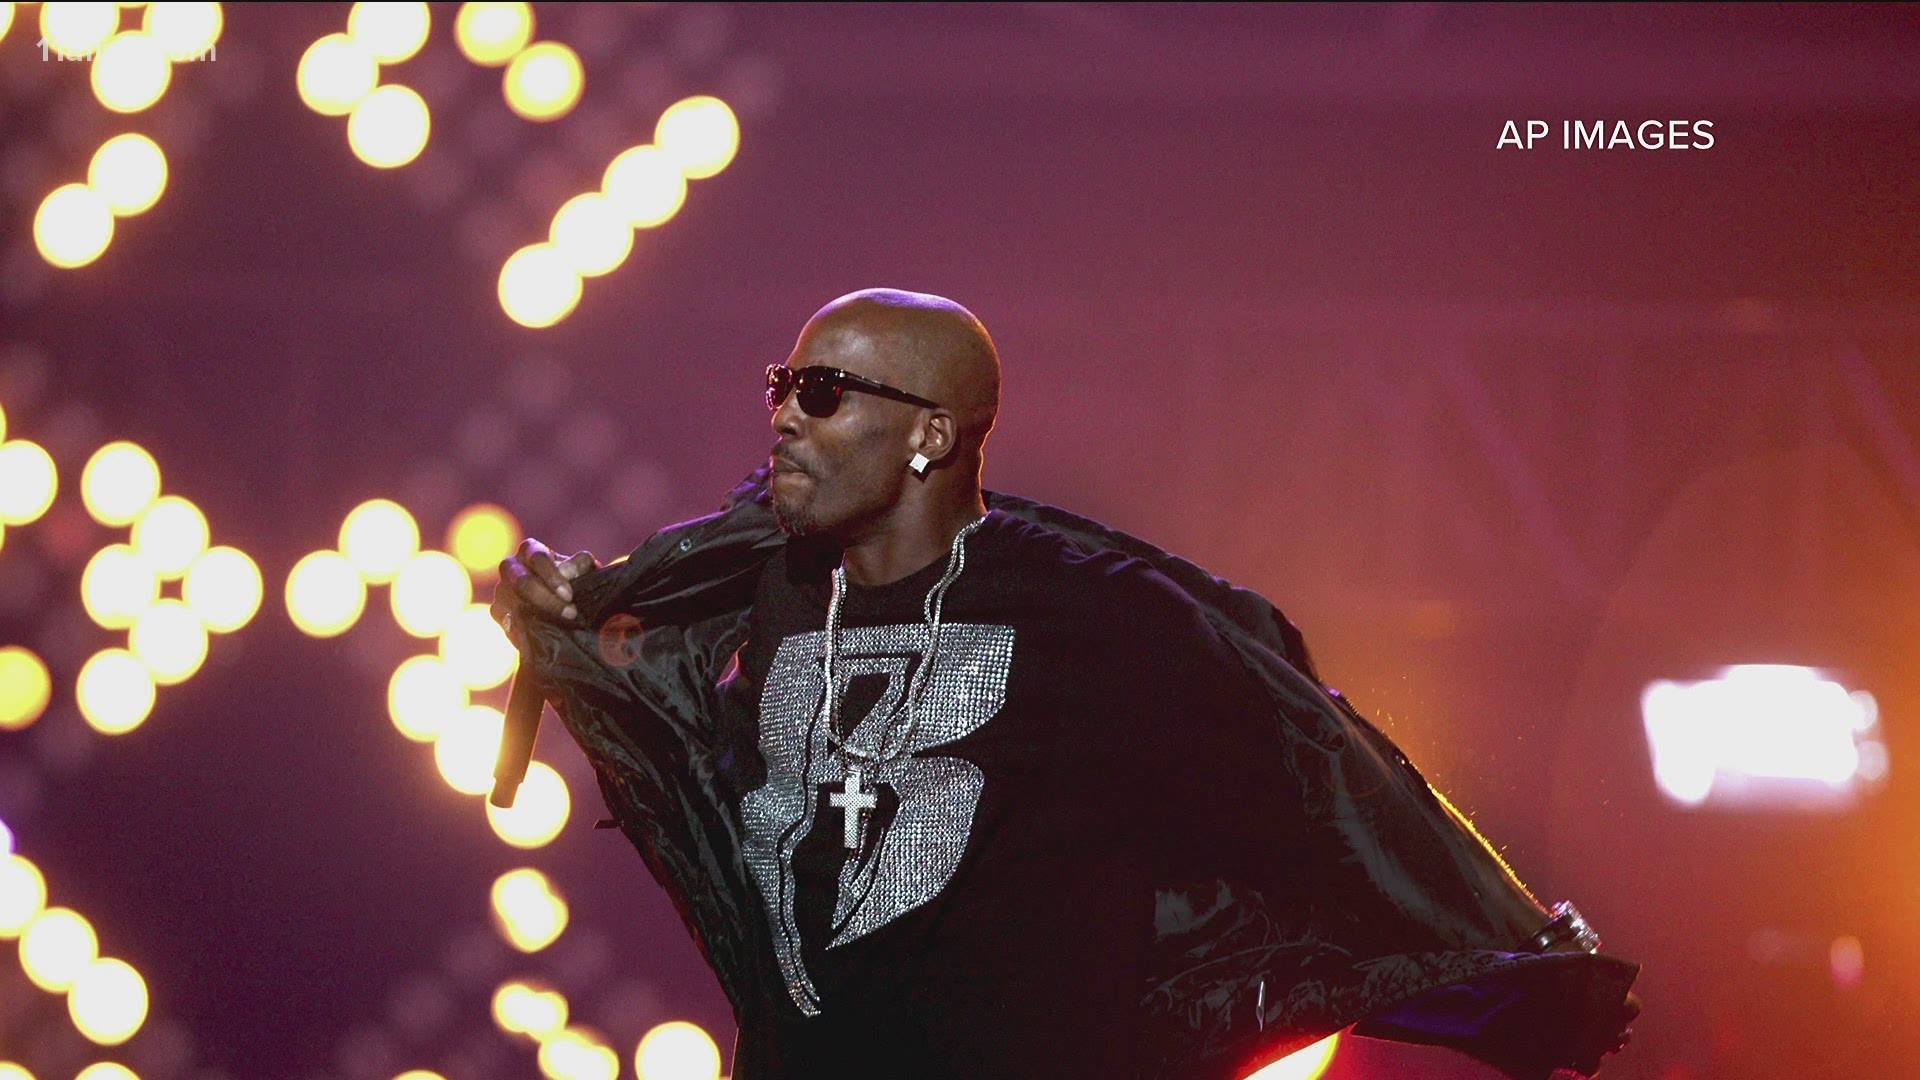 Rapper DMX remains in a coma after a heart attack last week. His manager tells NBC that he will undergo further tests on his brain function.